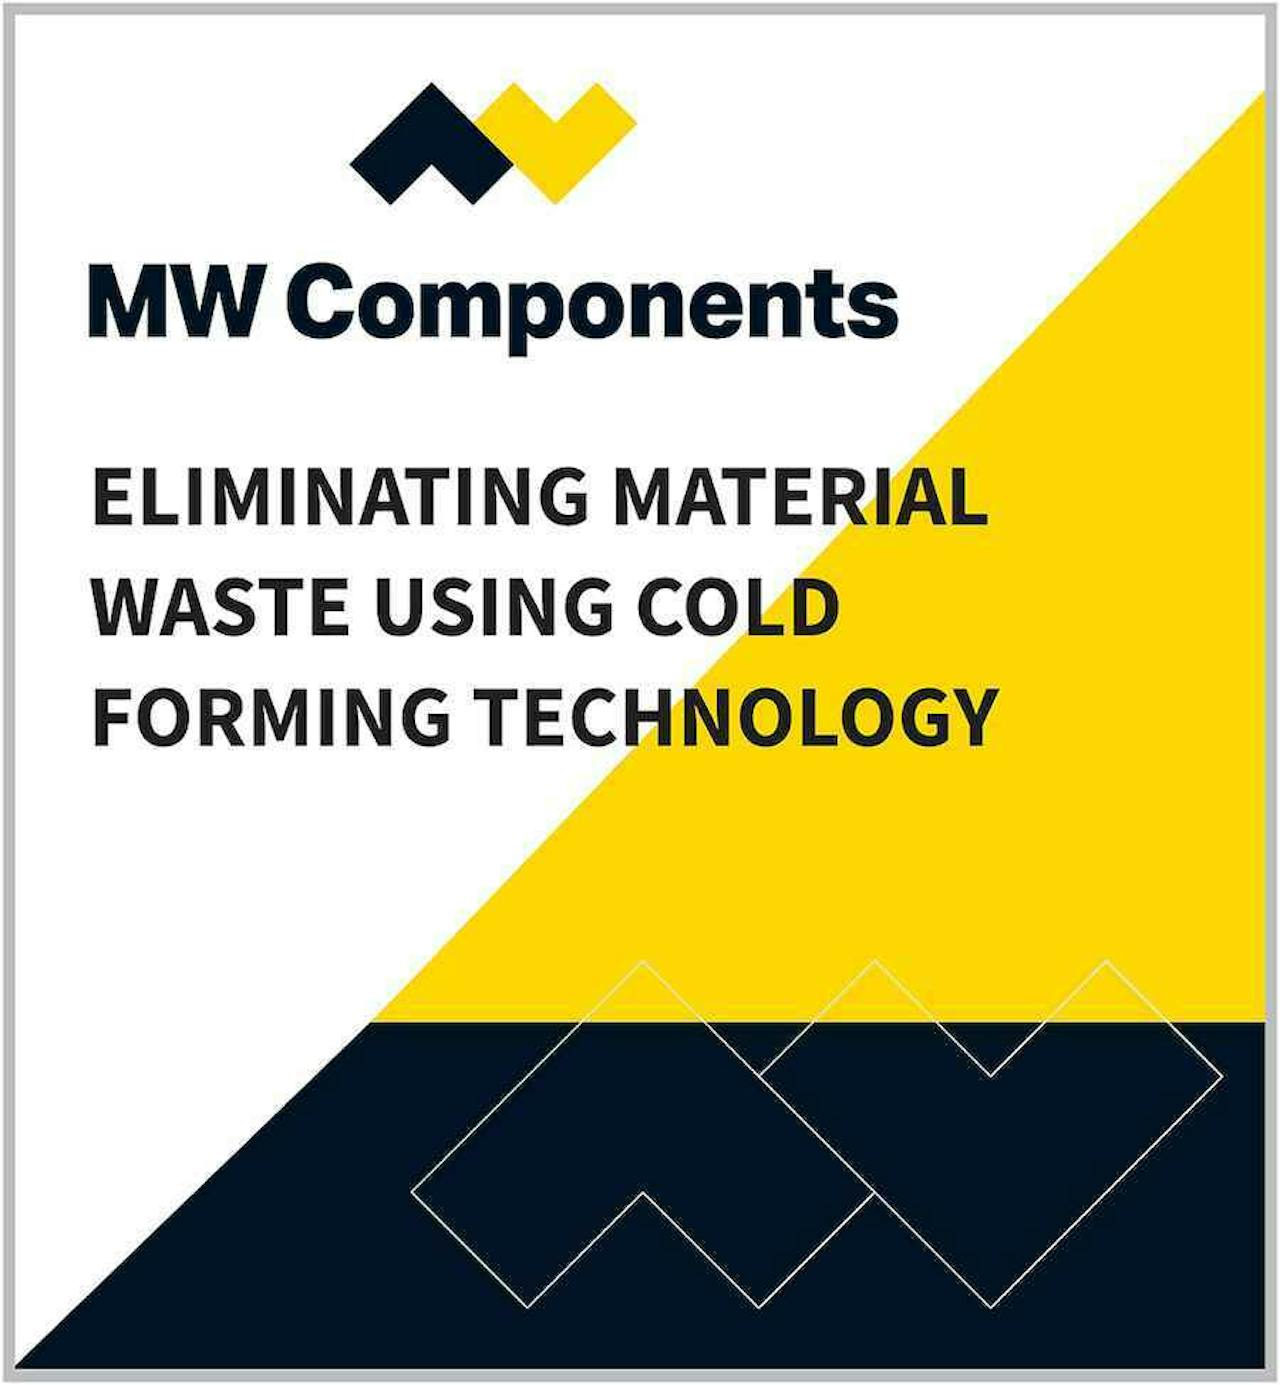 MWC Eliminating Material Waste Using Cold Forming Technology